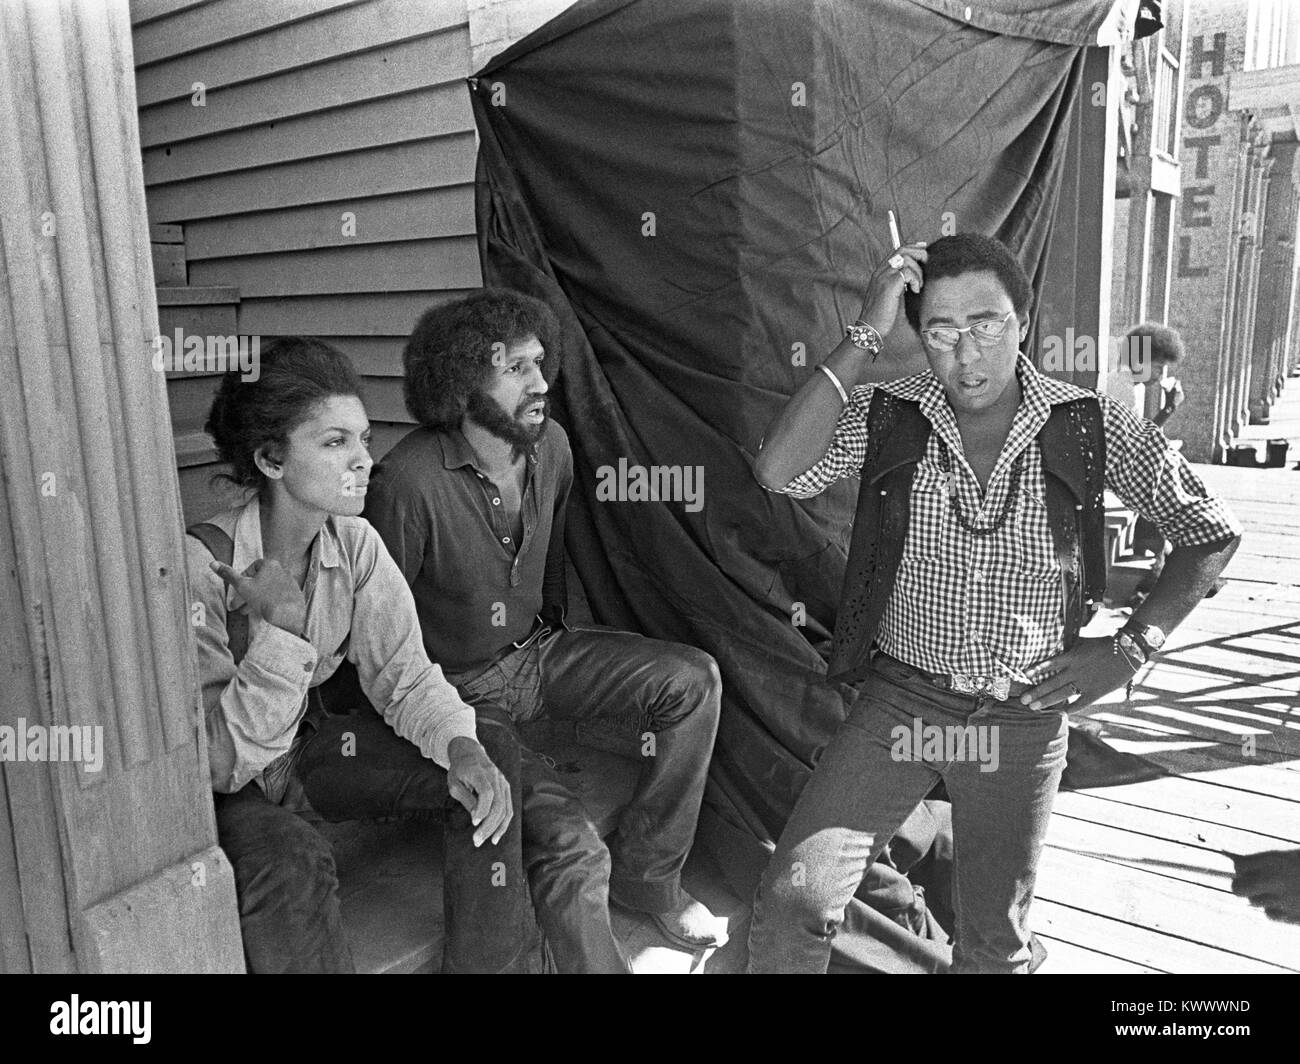 Actor Vonetta McGee (left), Max Julien (center), and director Gordon Parks Jr., on movie location in New Mexico while filming Thomasine and Bushrod, around 1973 Stock Photo